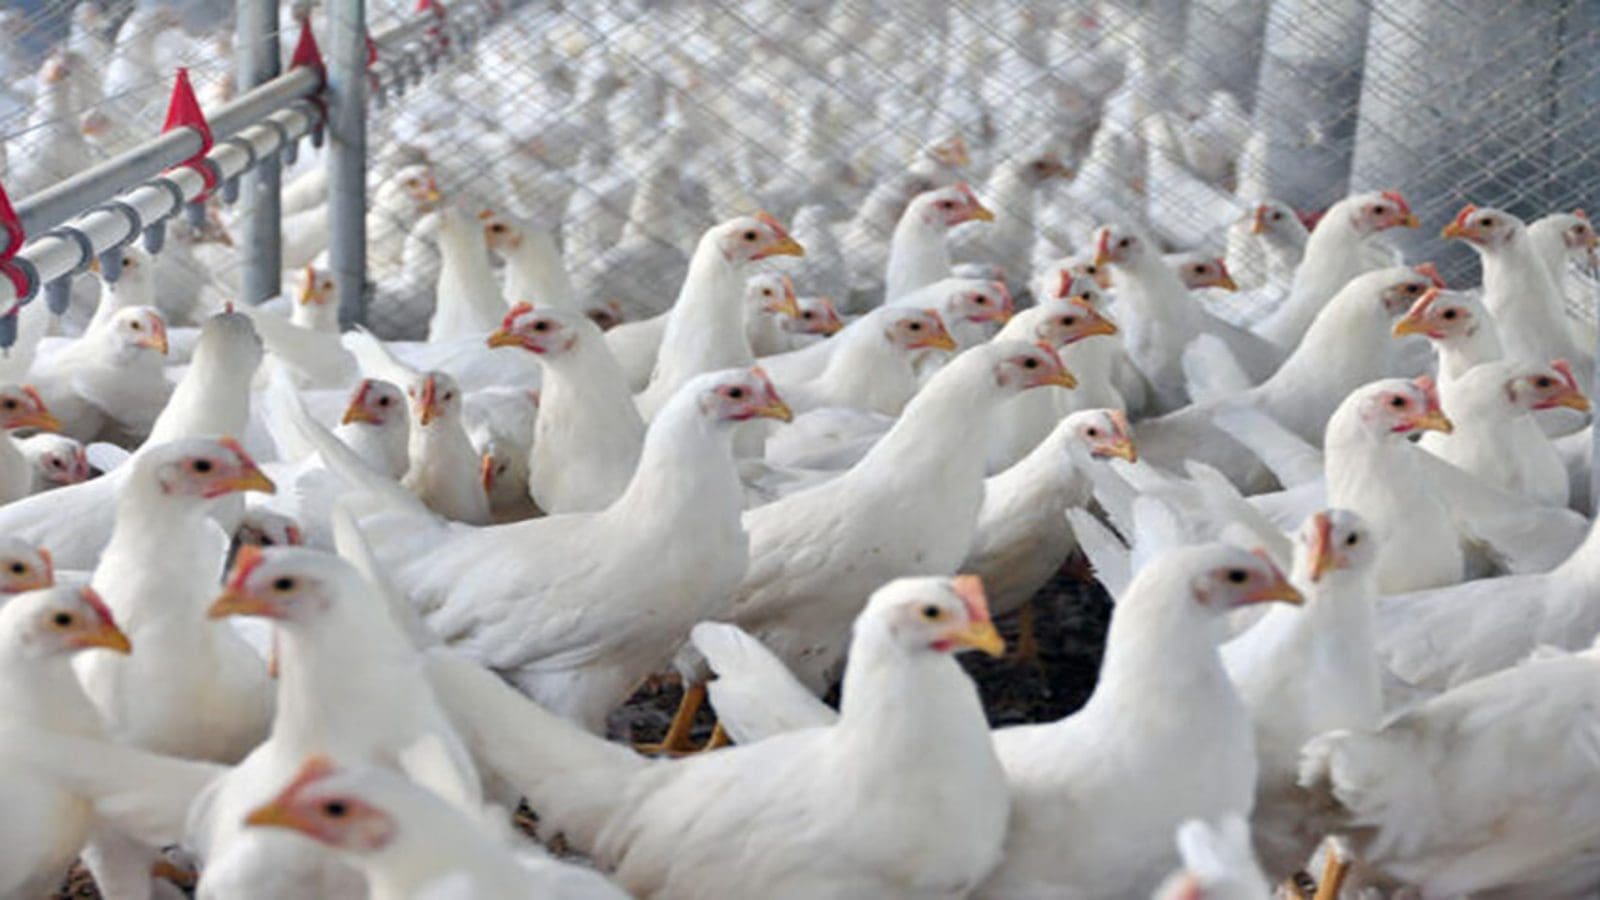 South Africa to start exporting poultry to the EU and Saudi Arabia markets